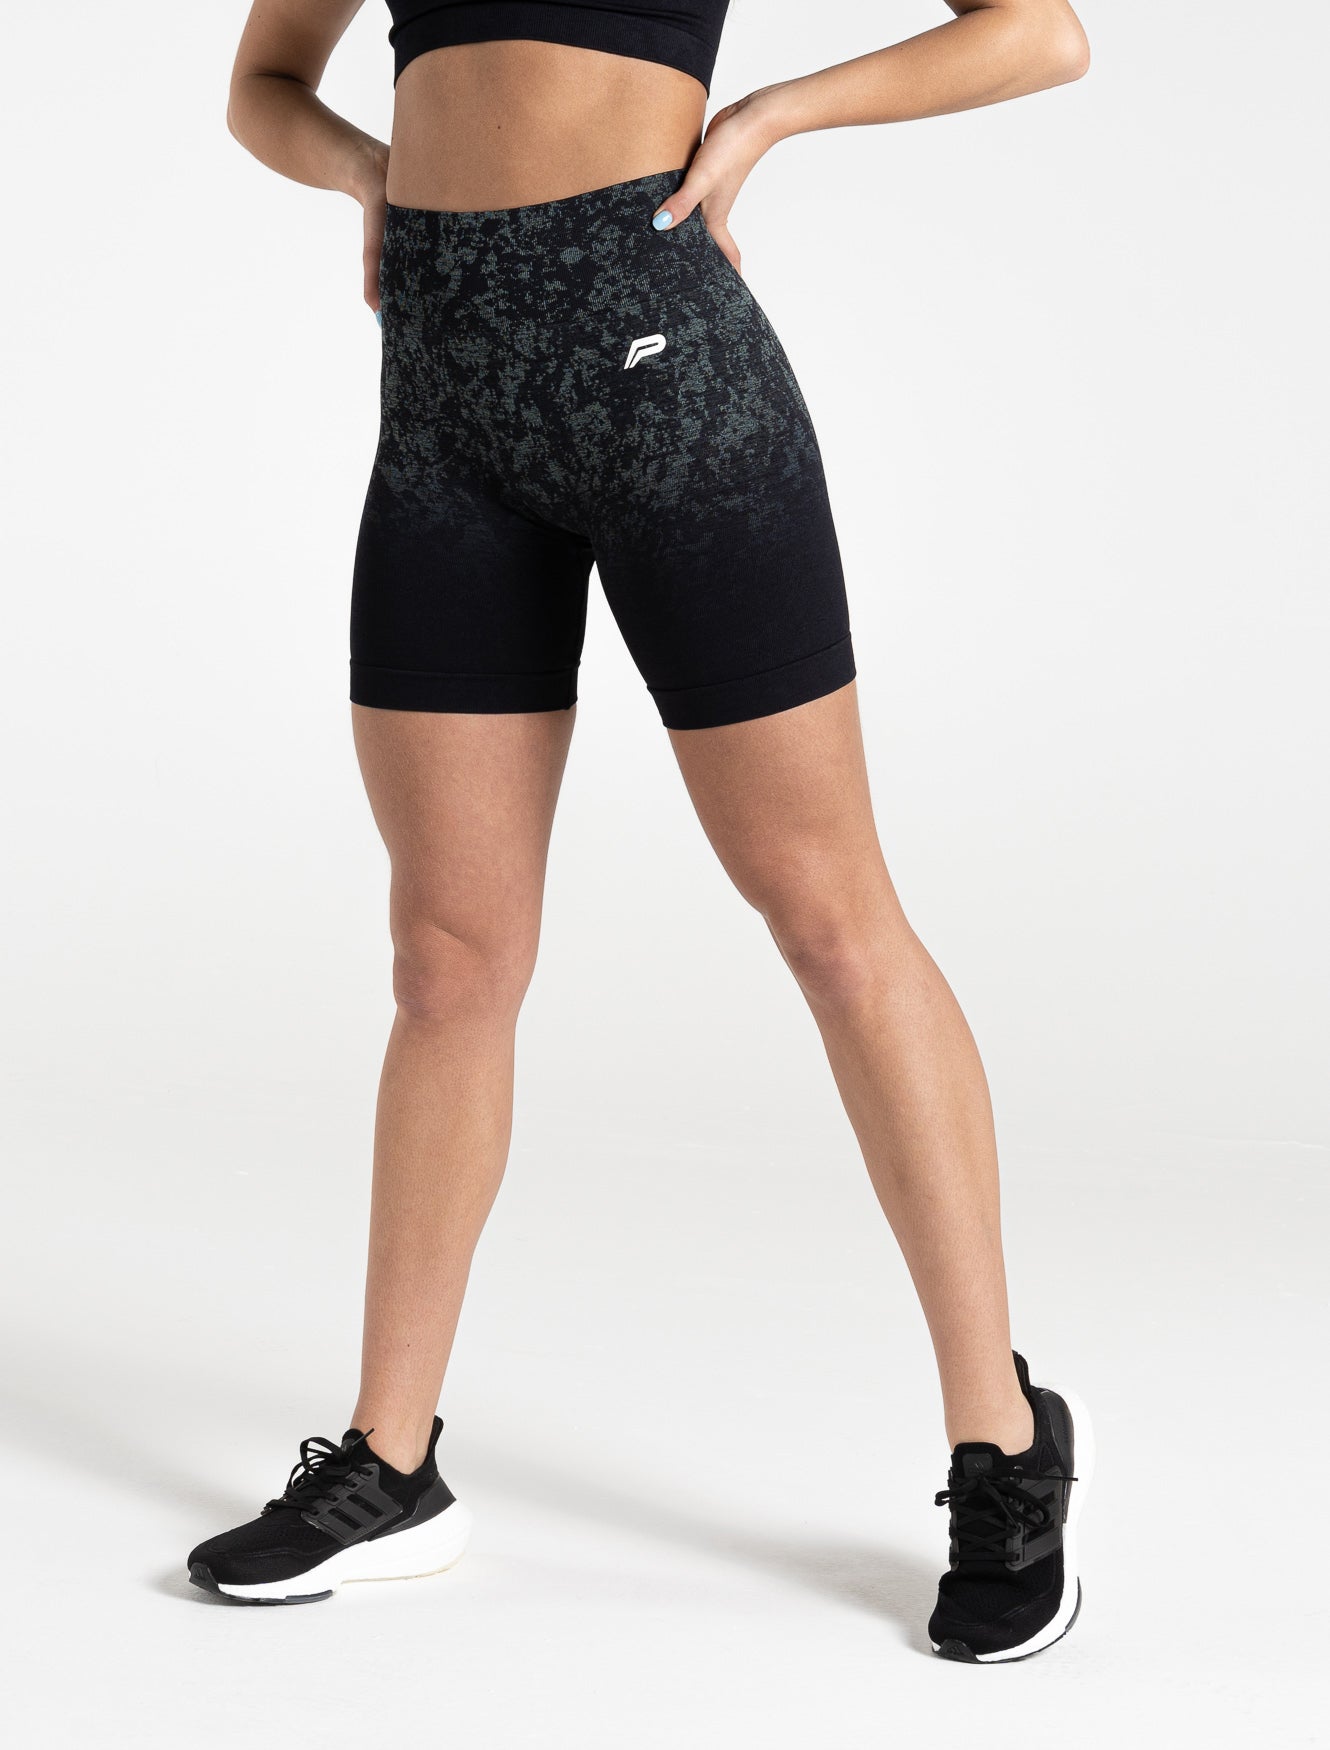 Cosmic Seamless Shorts / Black Ombre Pursue Fitness 2